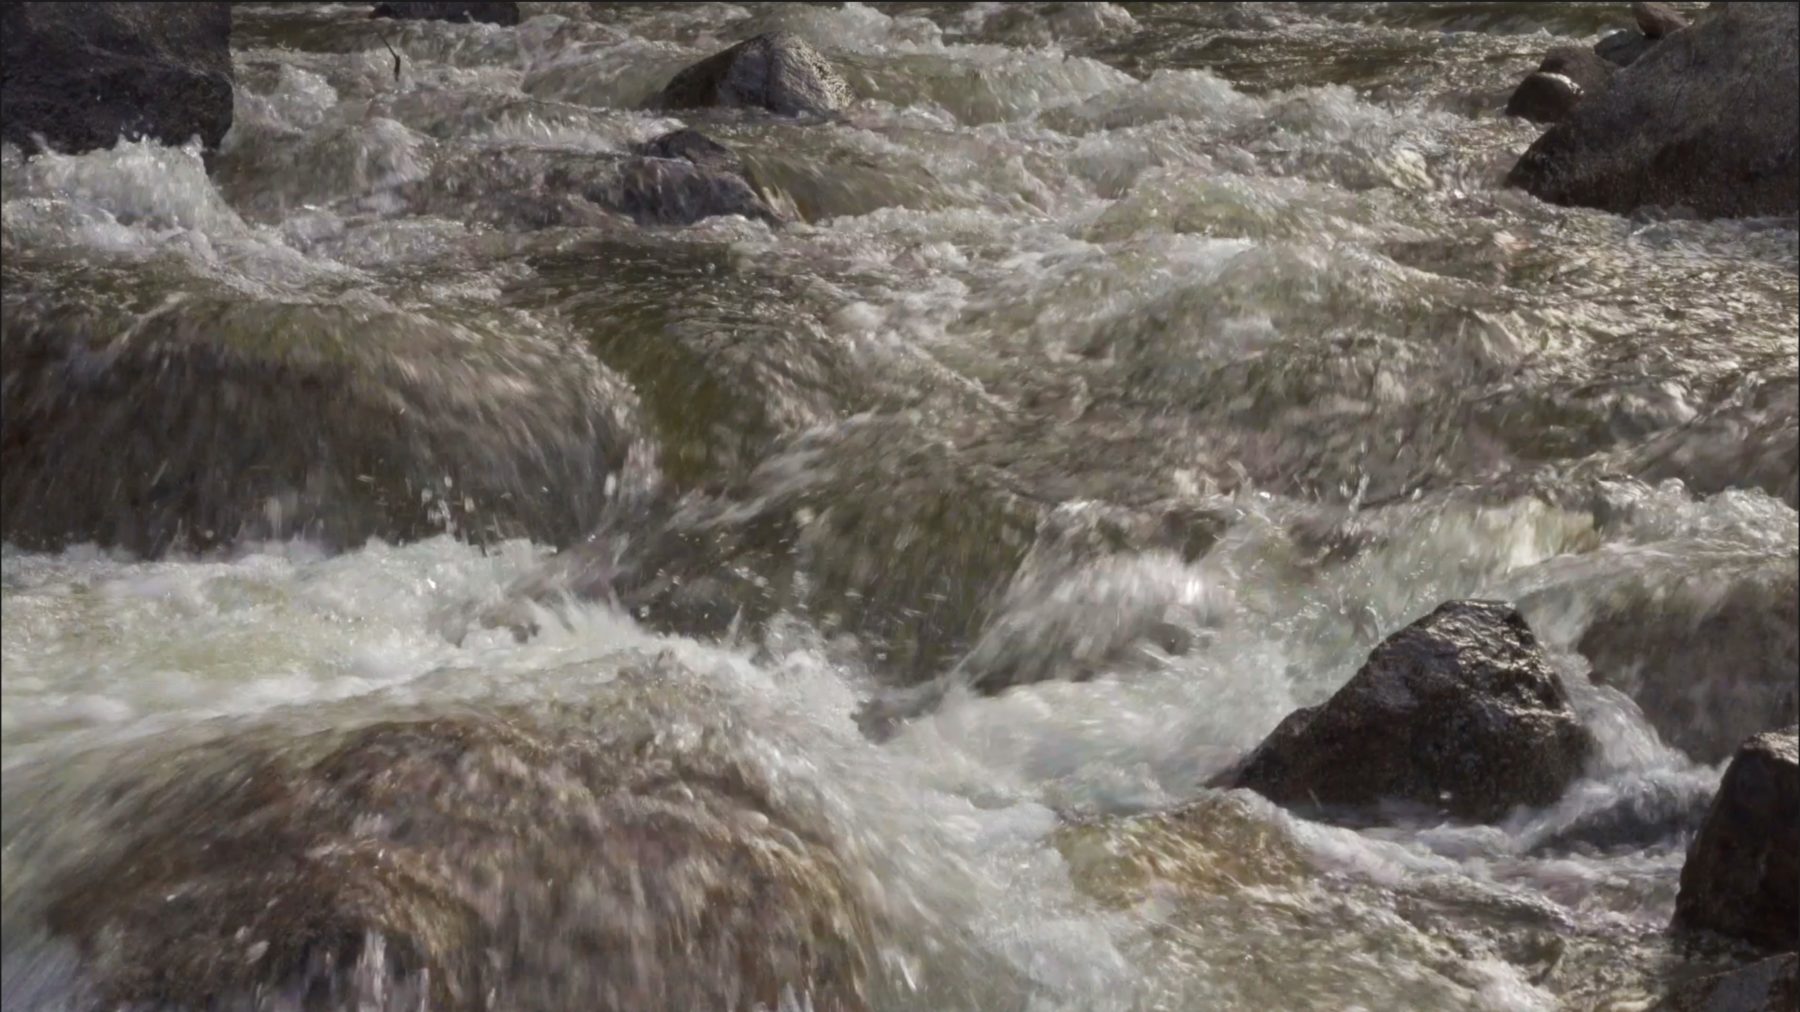 Decorative background of water rushing over rocks